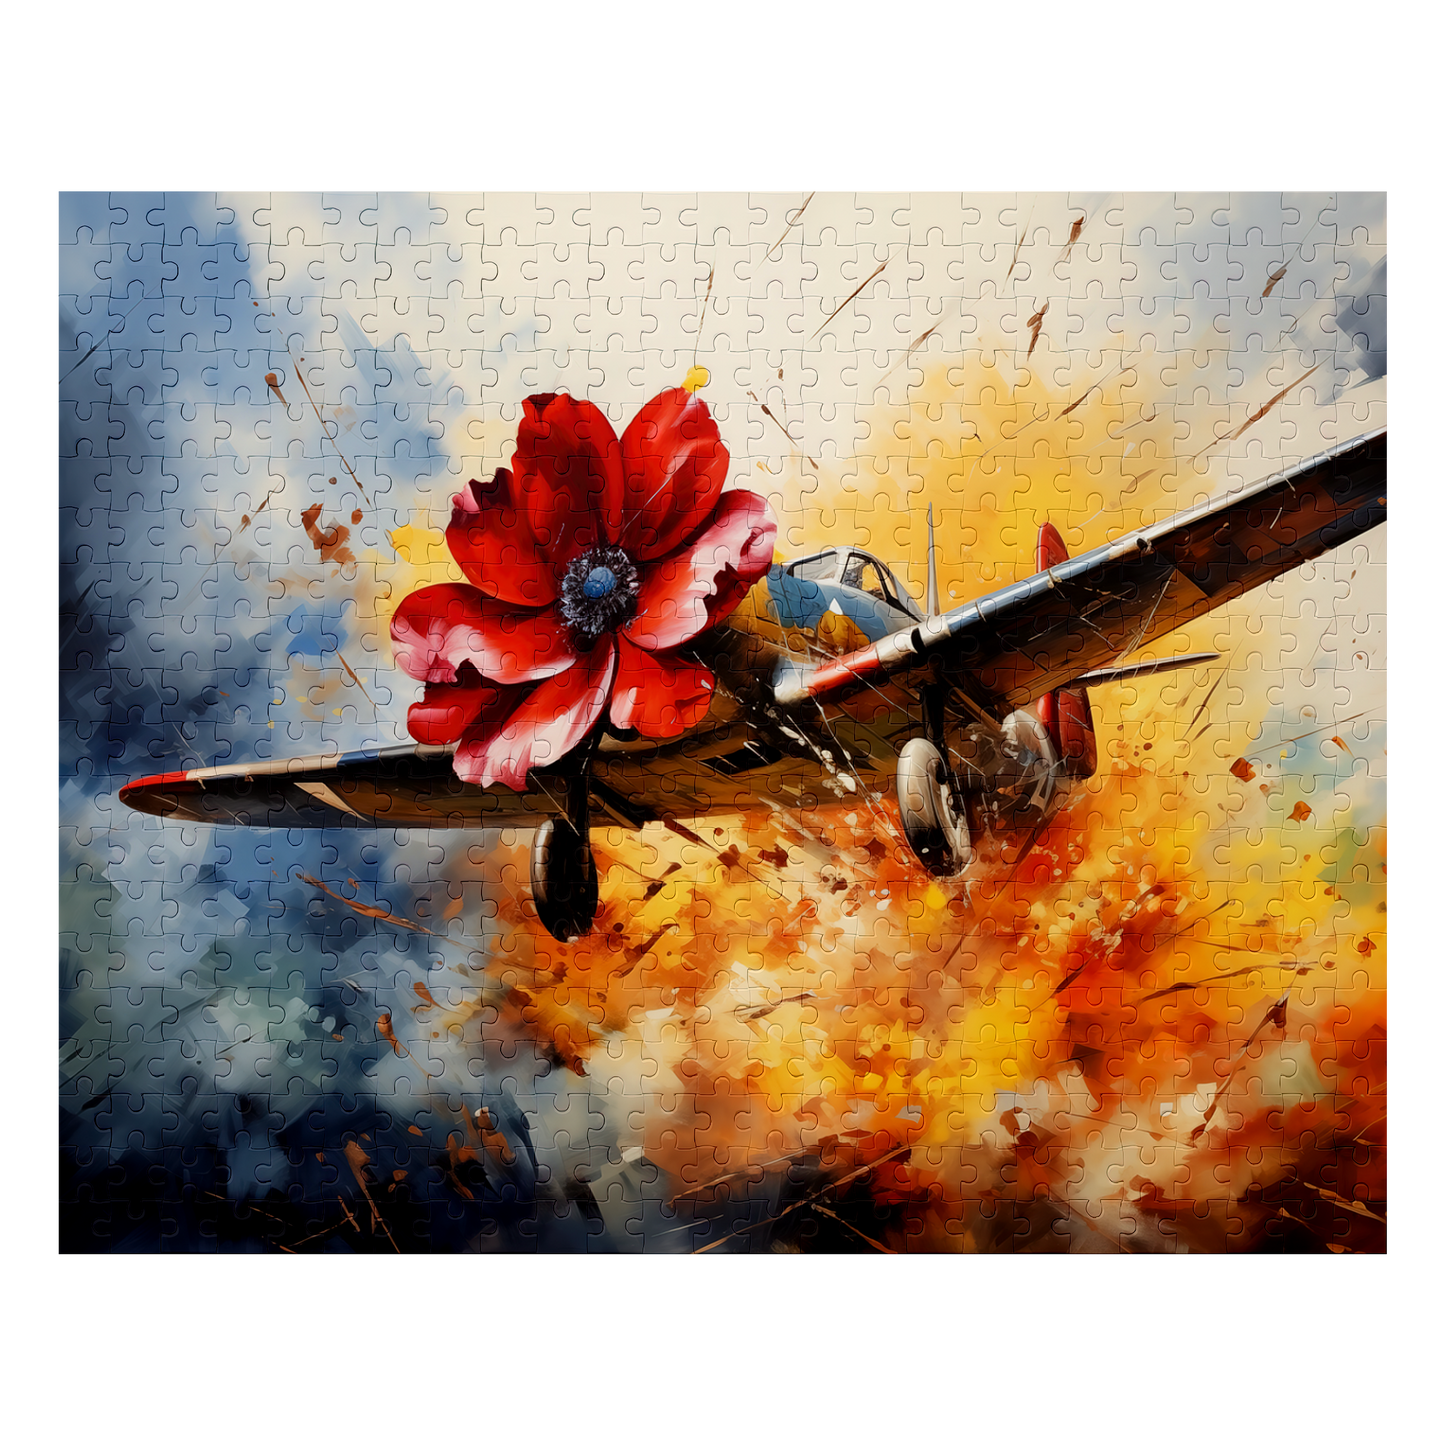 Proper Poppy - Premium Jigsaw Puzzle - Vibrant, Aerial, Floral, Explosion - Multiple Sizes Available